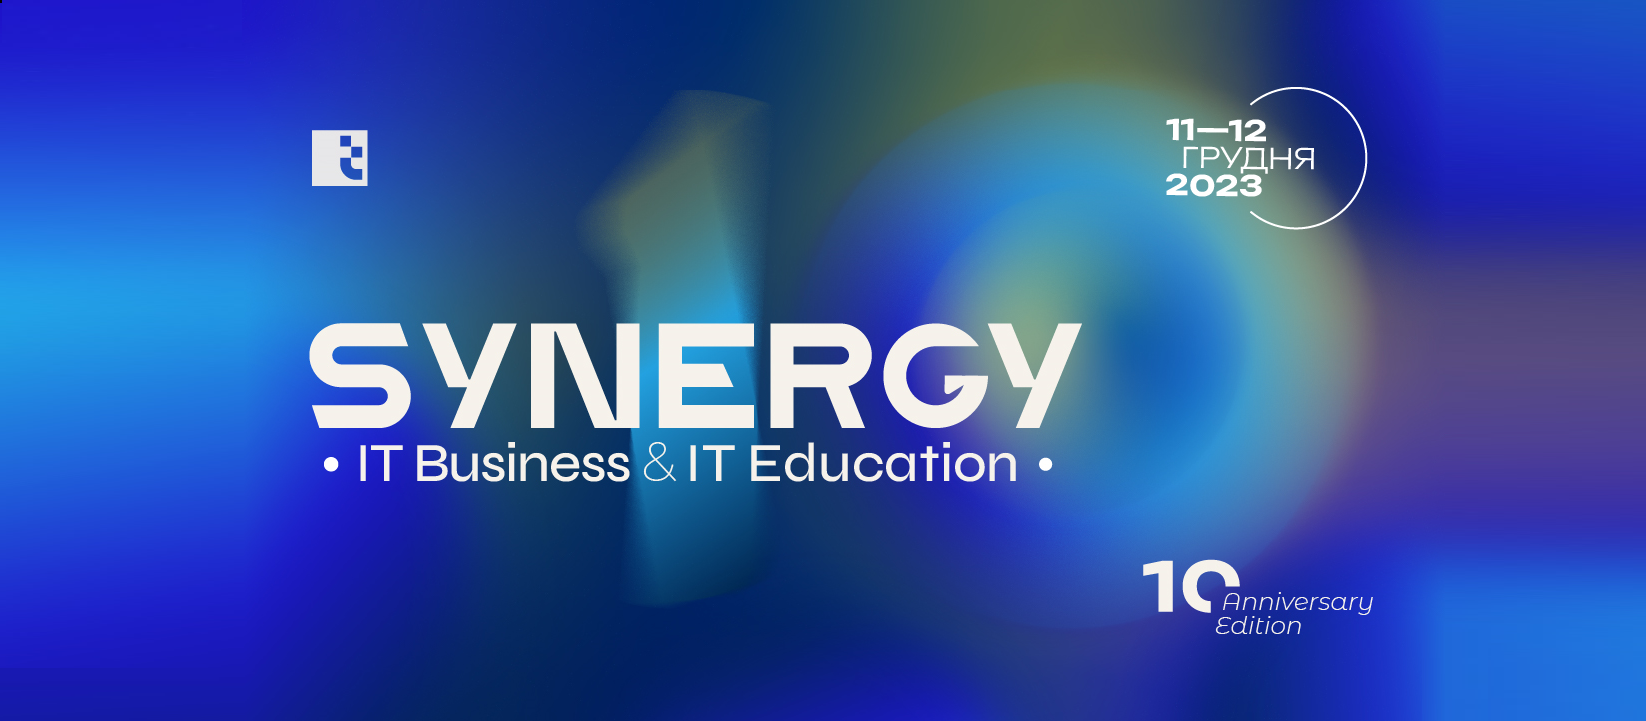 Synergy. IT Business & IT Education: 10th anniversary edition